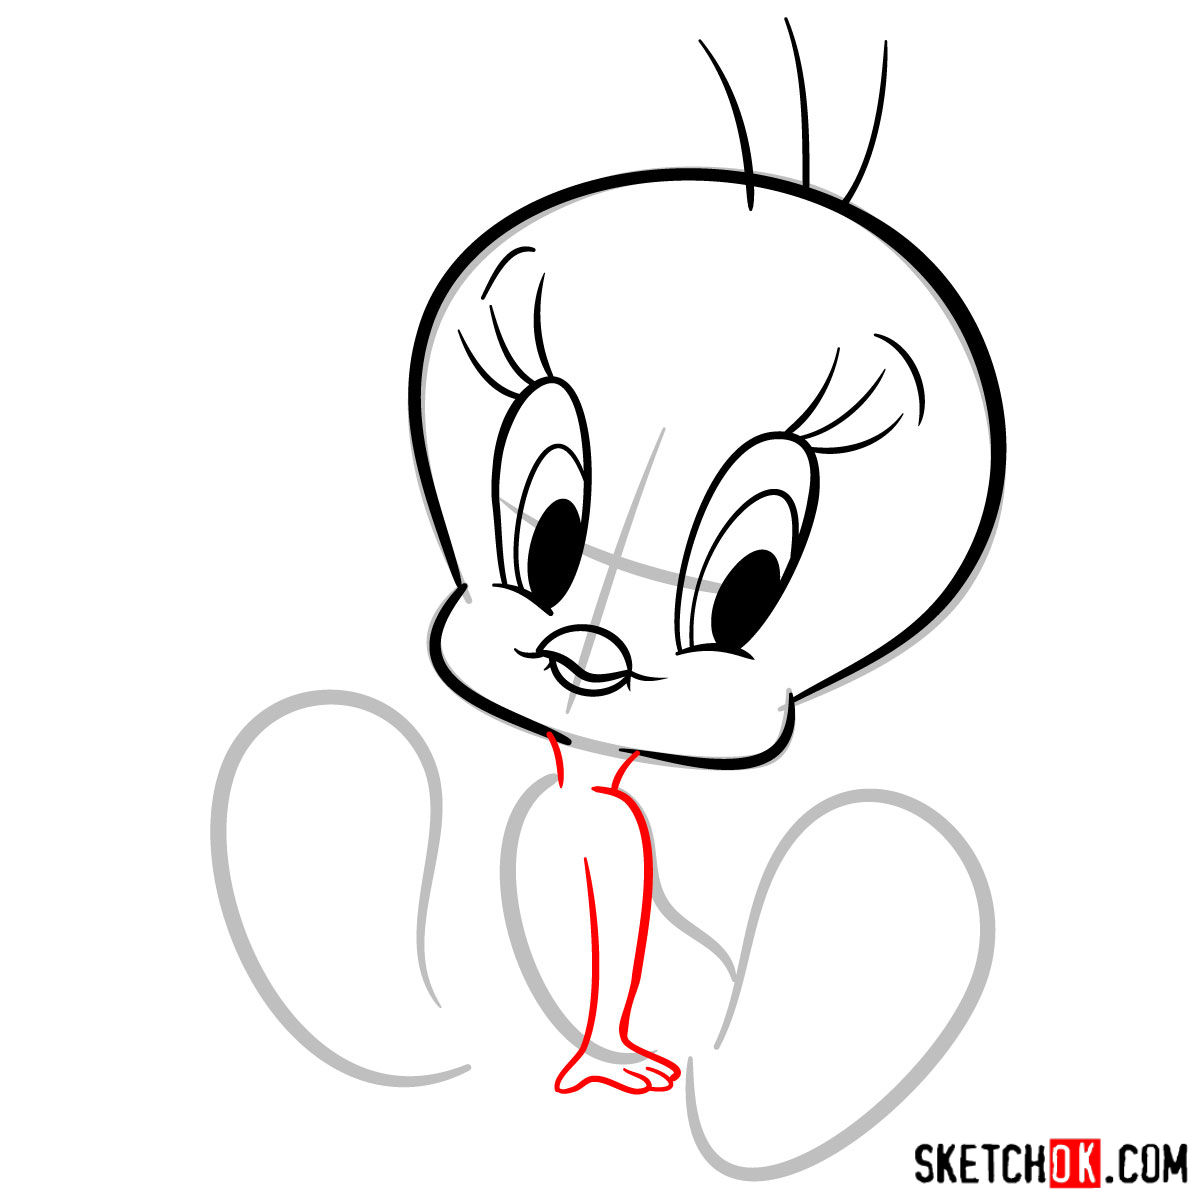 How to draw Tweety Bird Sketchok easy drawing guides